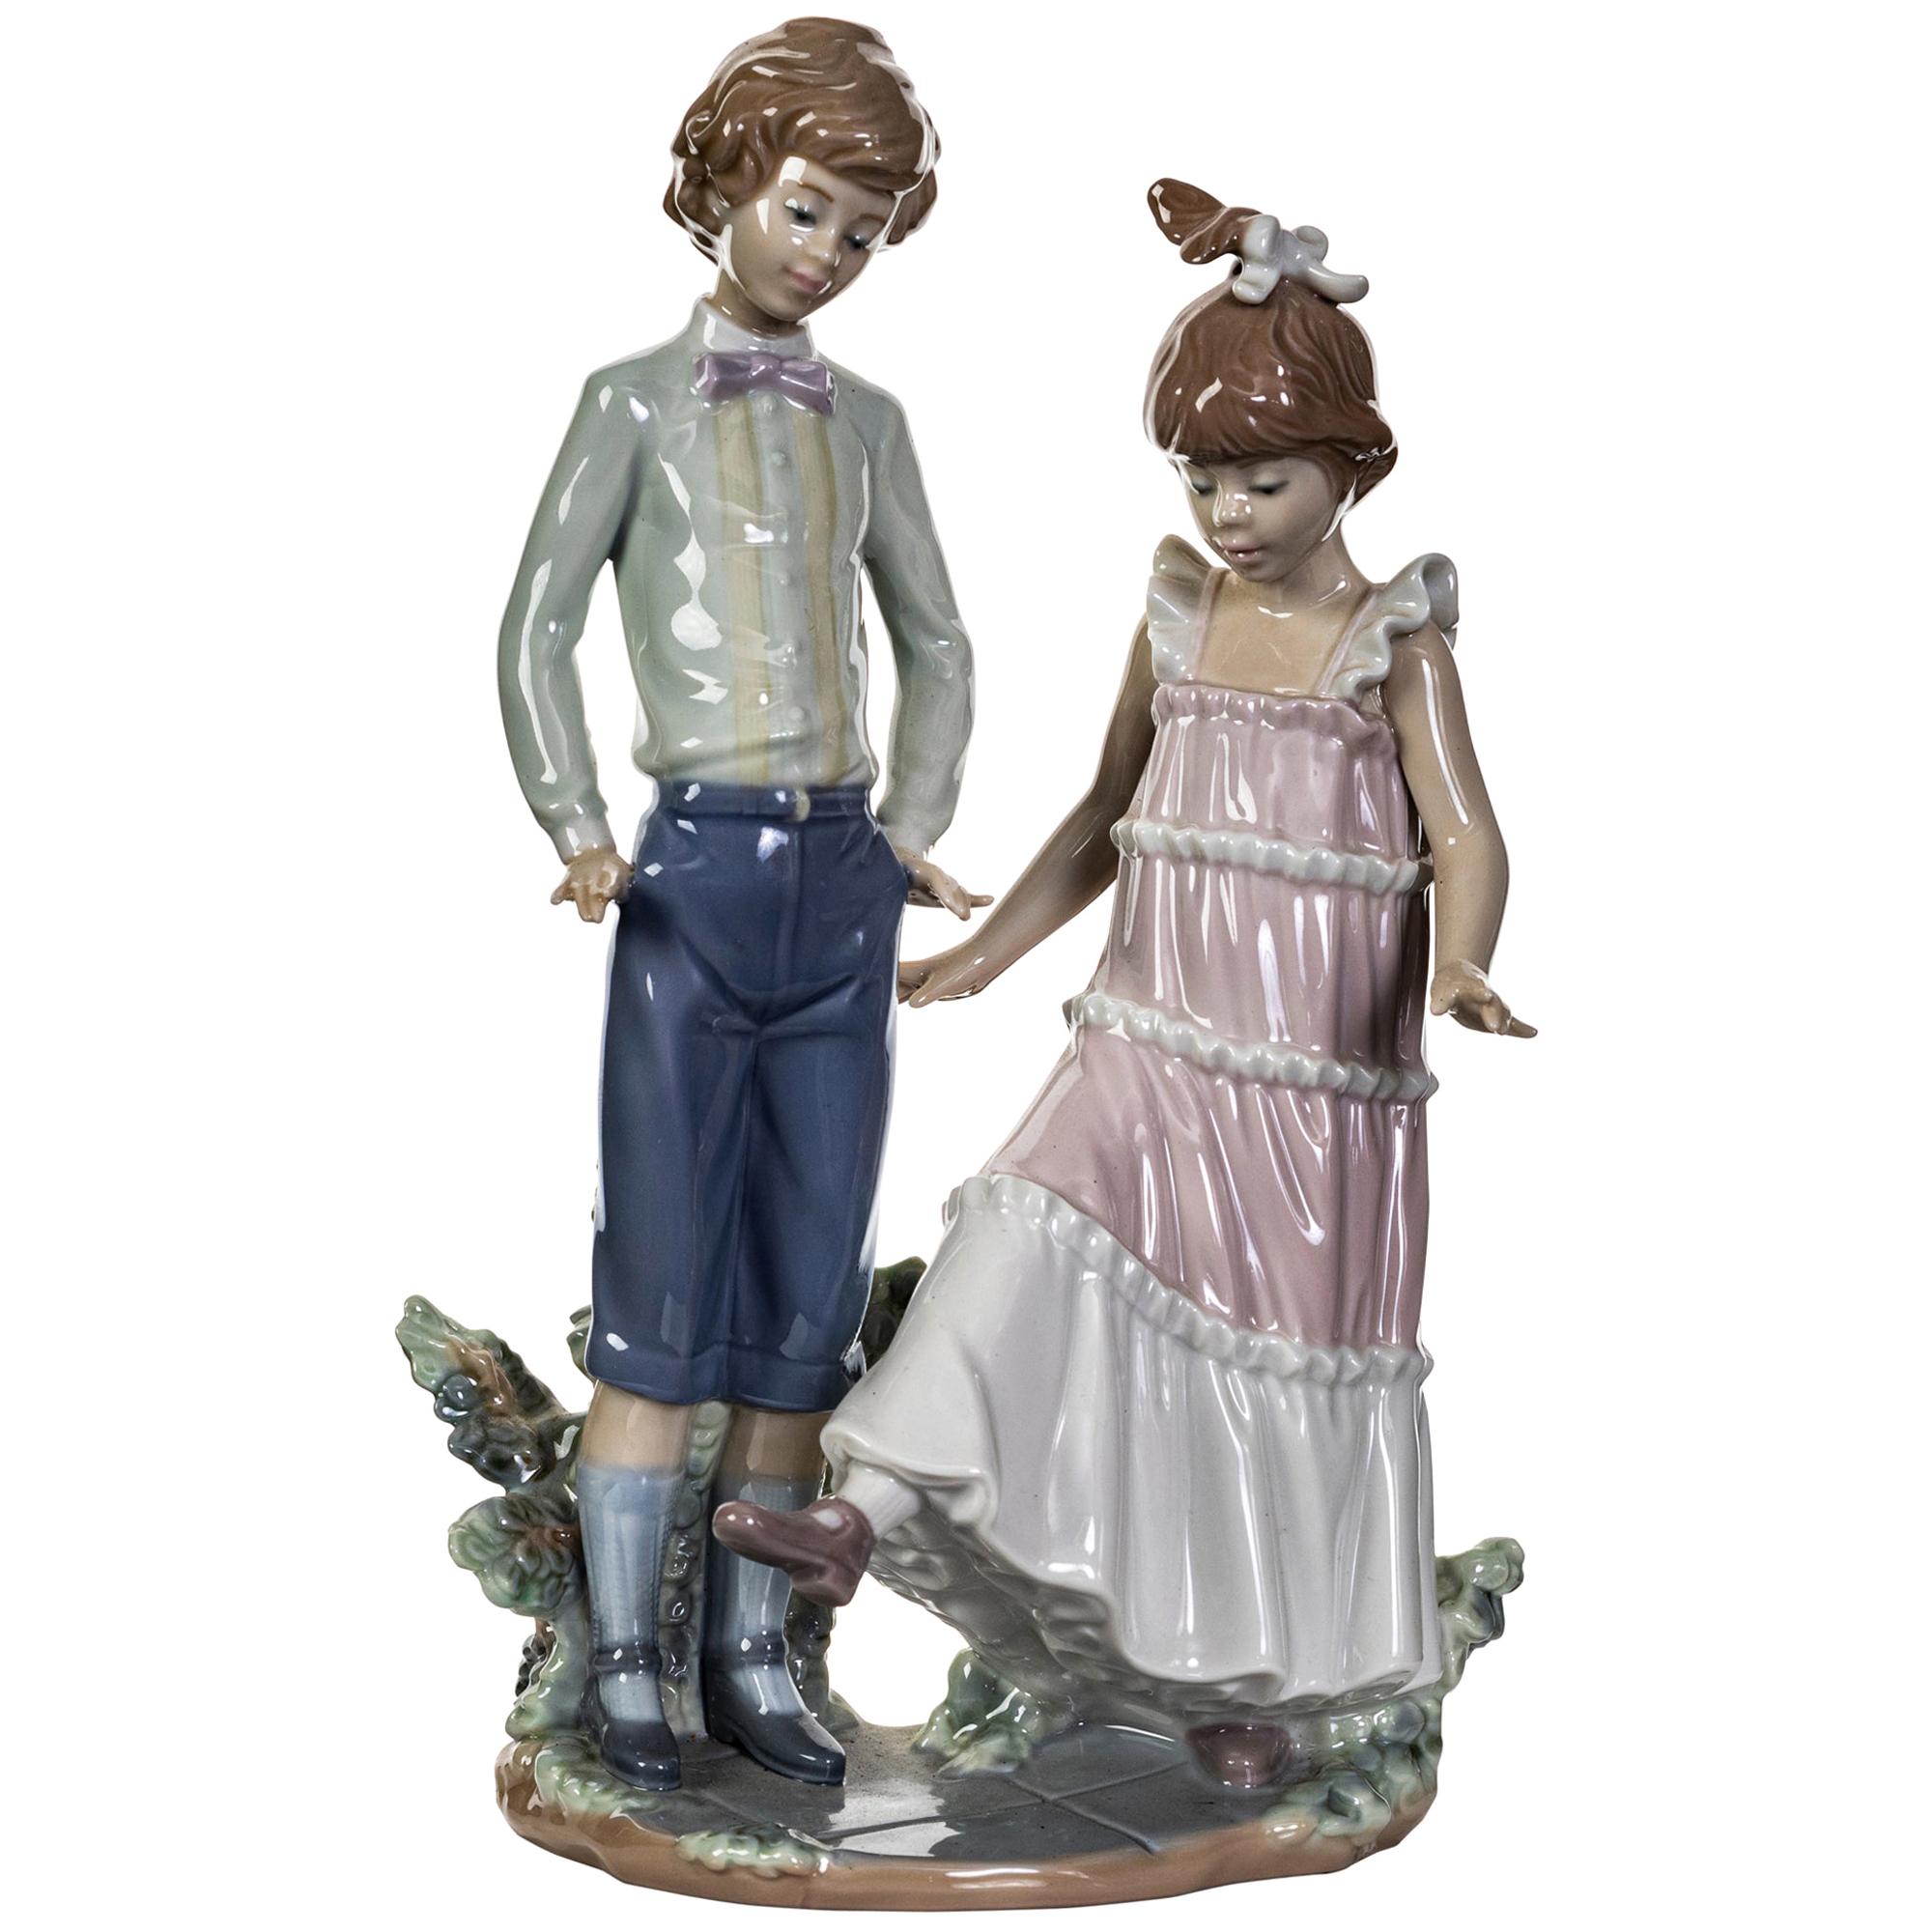 Lladró, Established 1953 "First Dance" Figures of a Boy and Girl For Sale